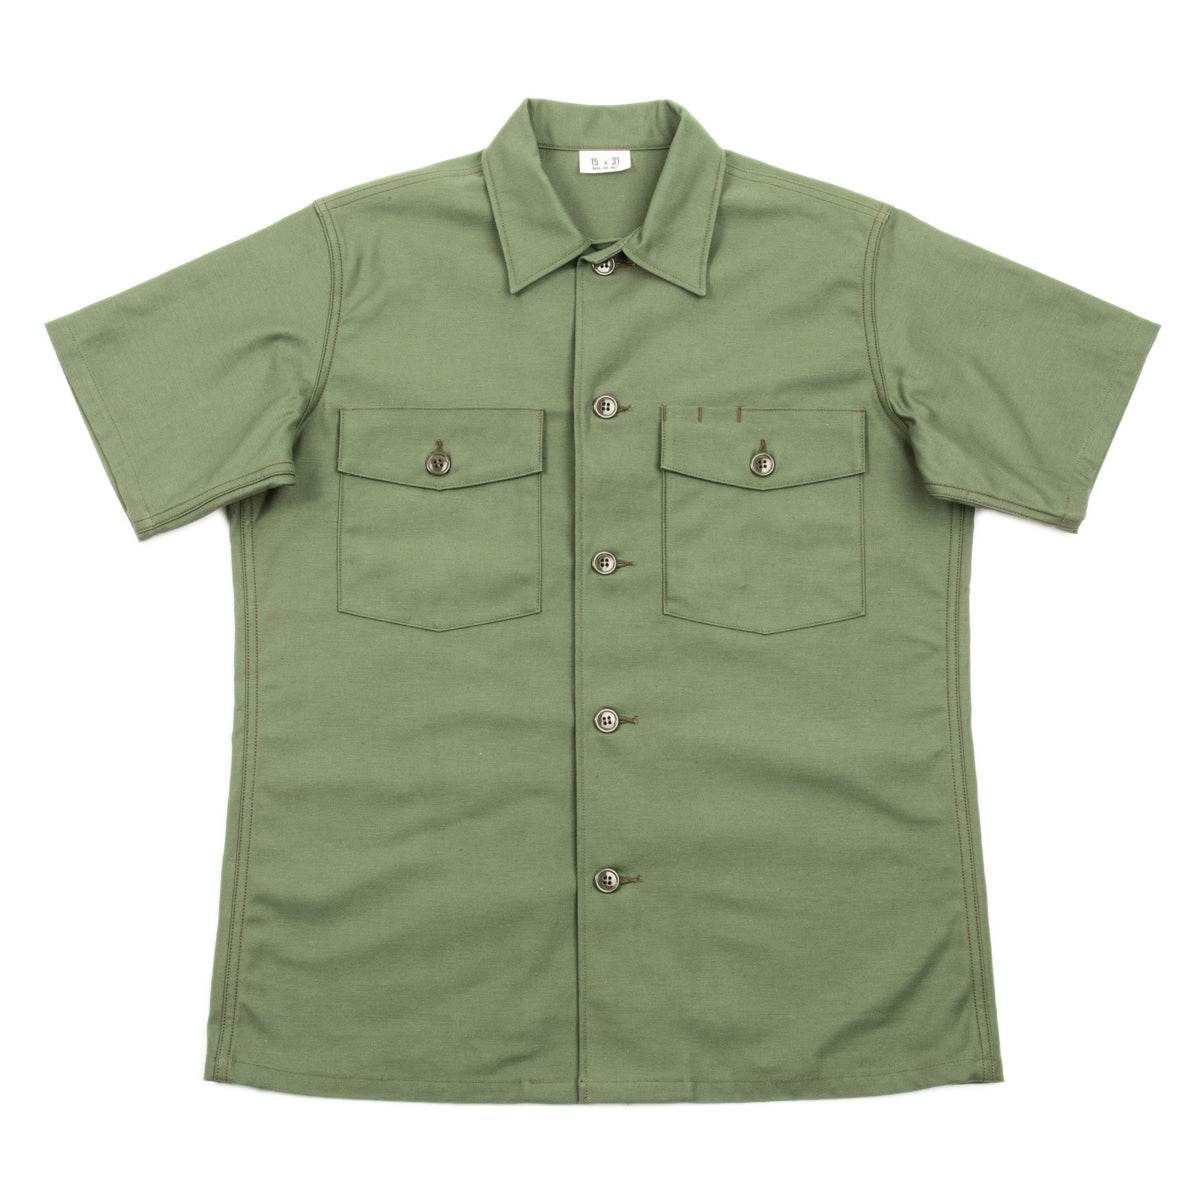 The Real McCoy's Cotton Sateen Shirt S/S - Olive Green – Standard & Strange